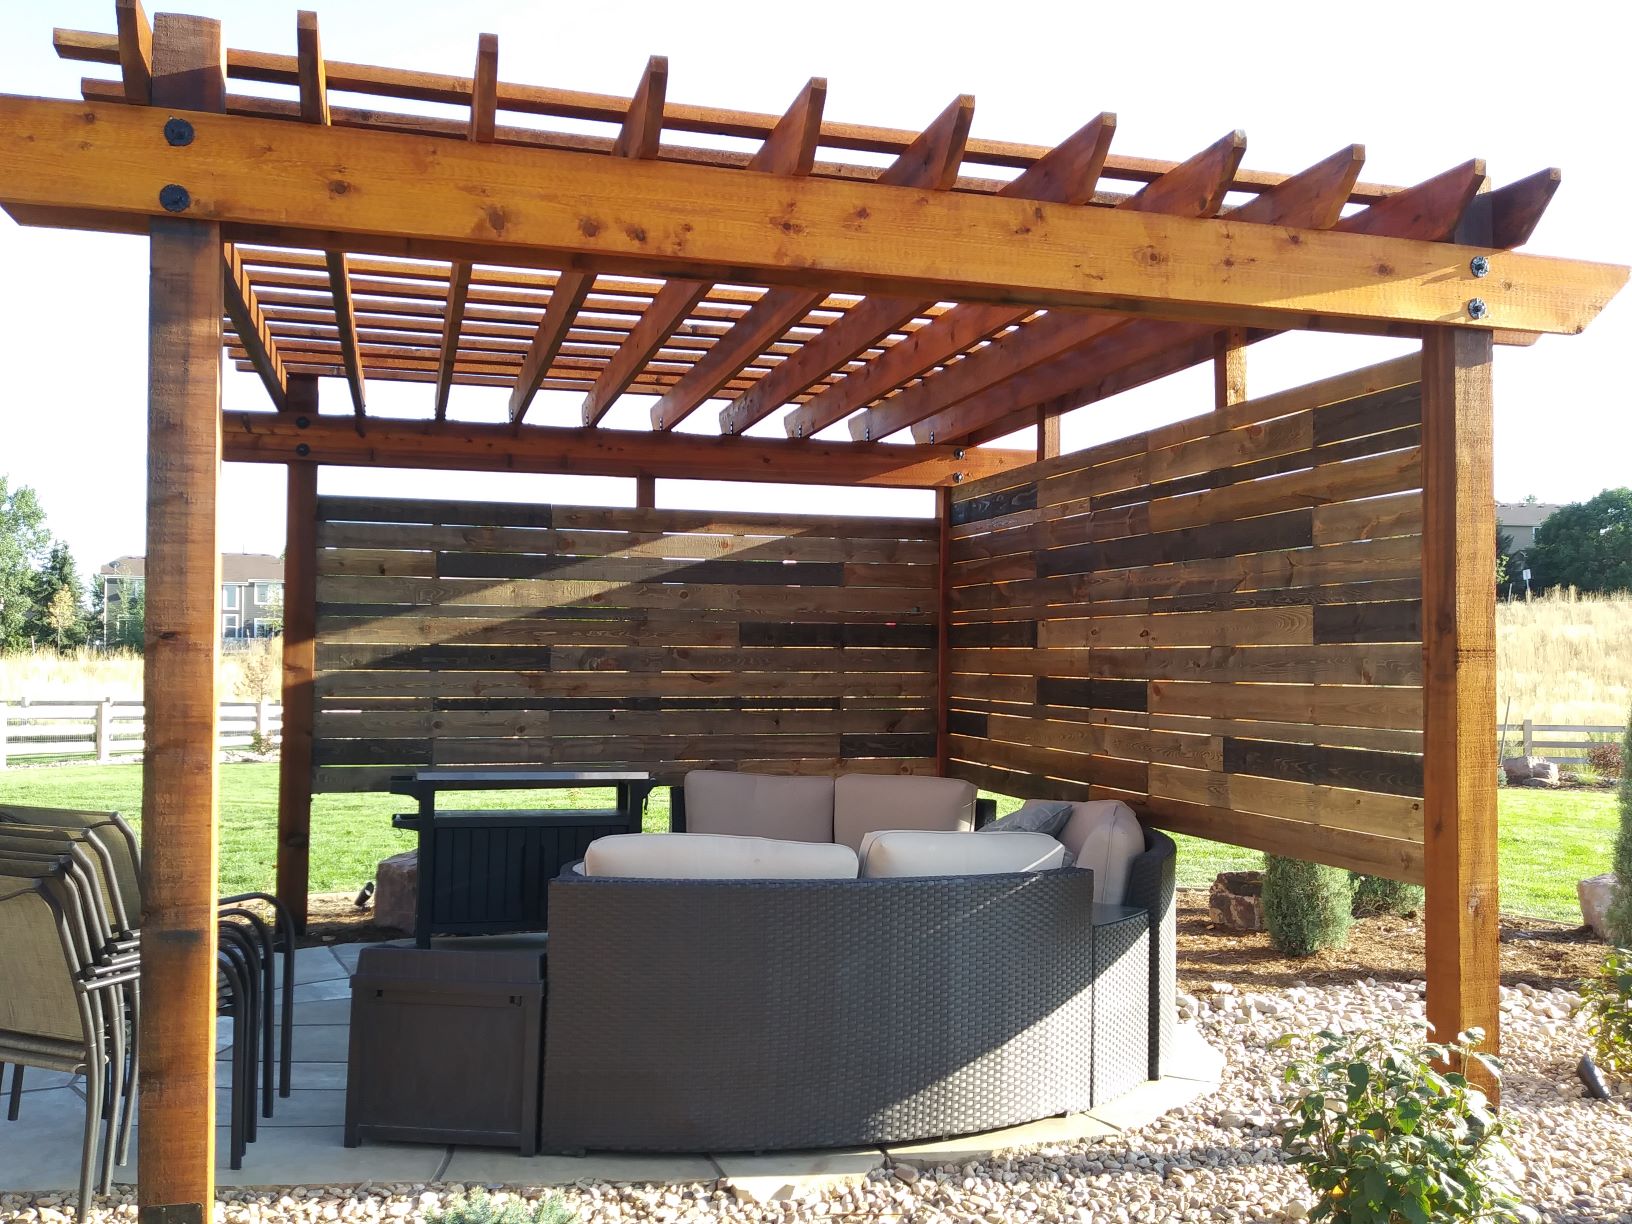 Pergola over flat stone patio with seating and a wind/privacy wall.